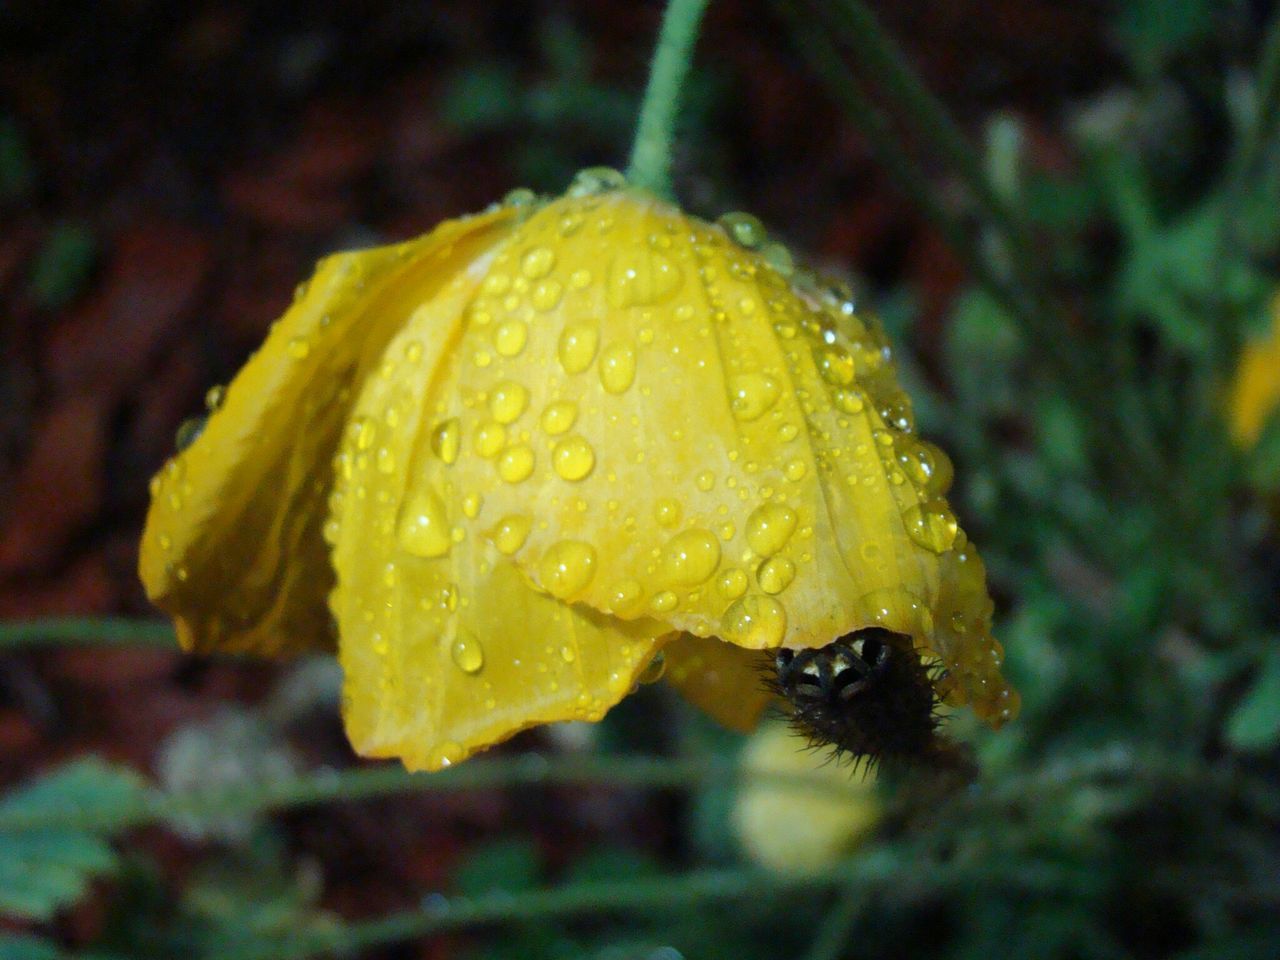 drop, freshness, close-up, wet, water, yellow, fragility, dew, flower, focus on foreground, beauty in nature, growth, flower head, nature, single flower, petal, water drop, raindrop, droplet, purity